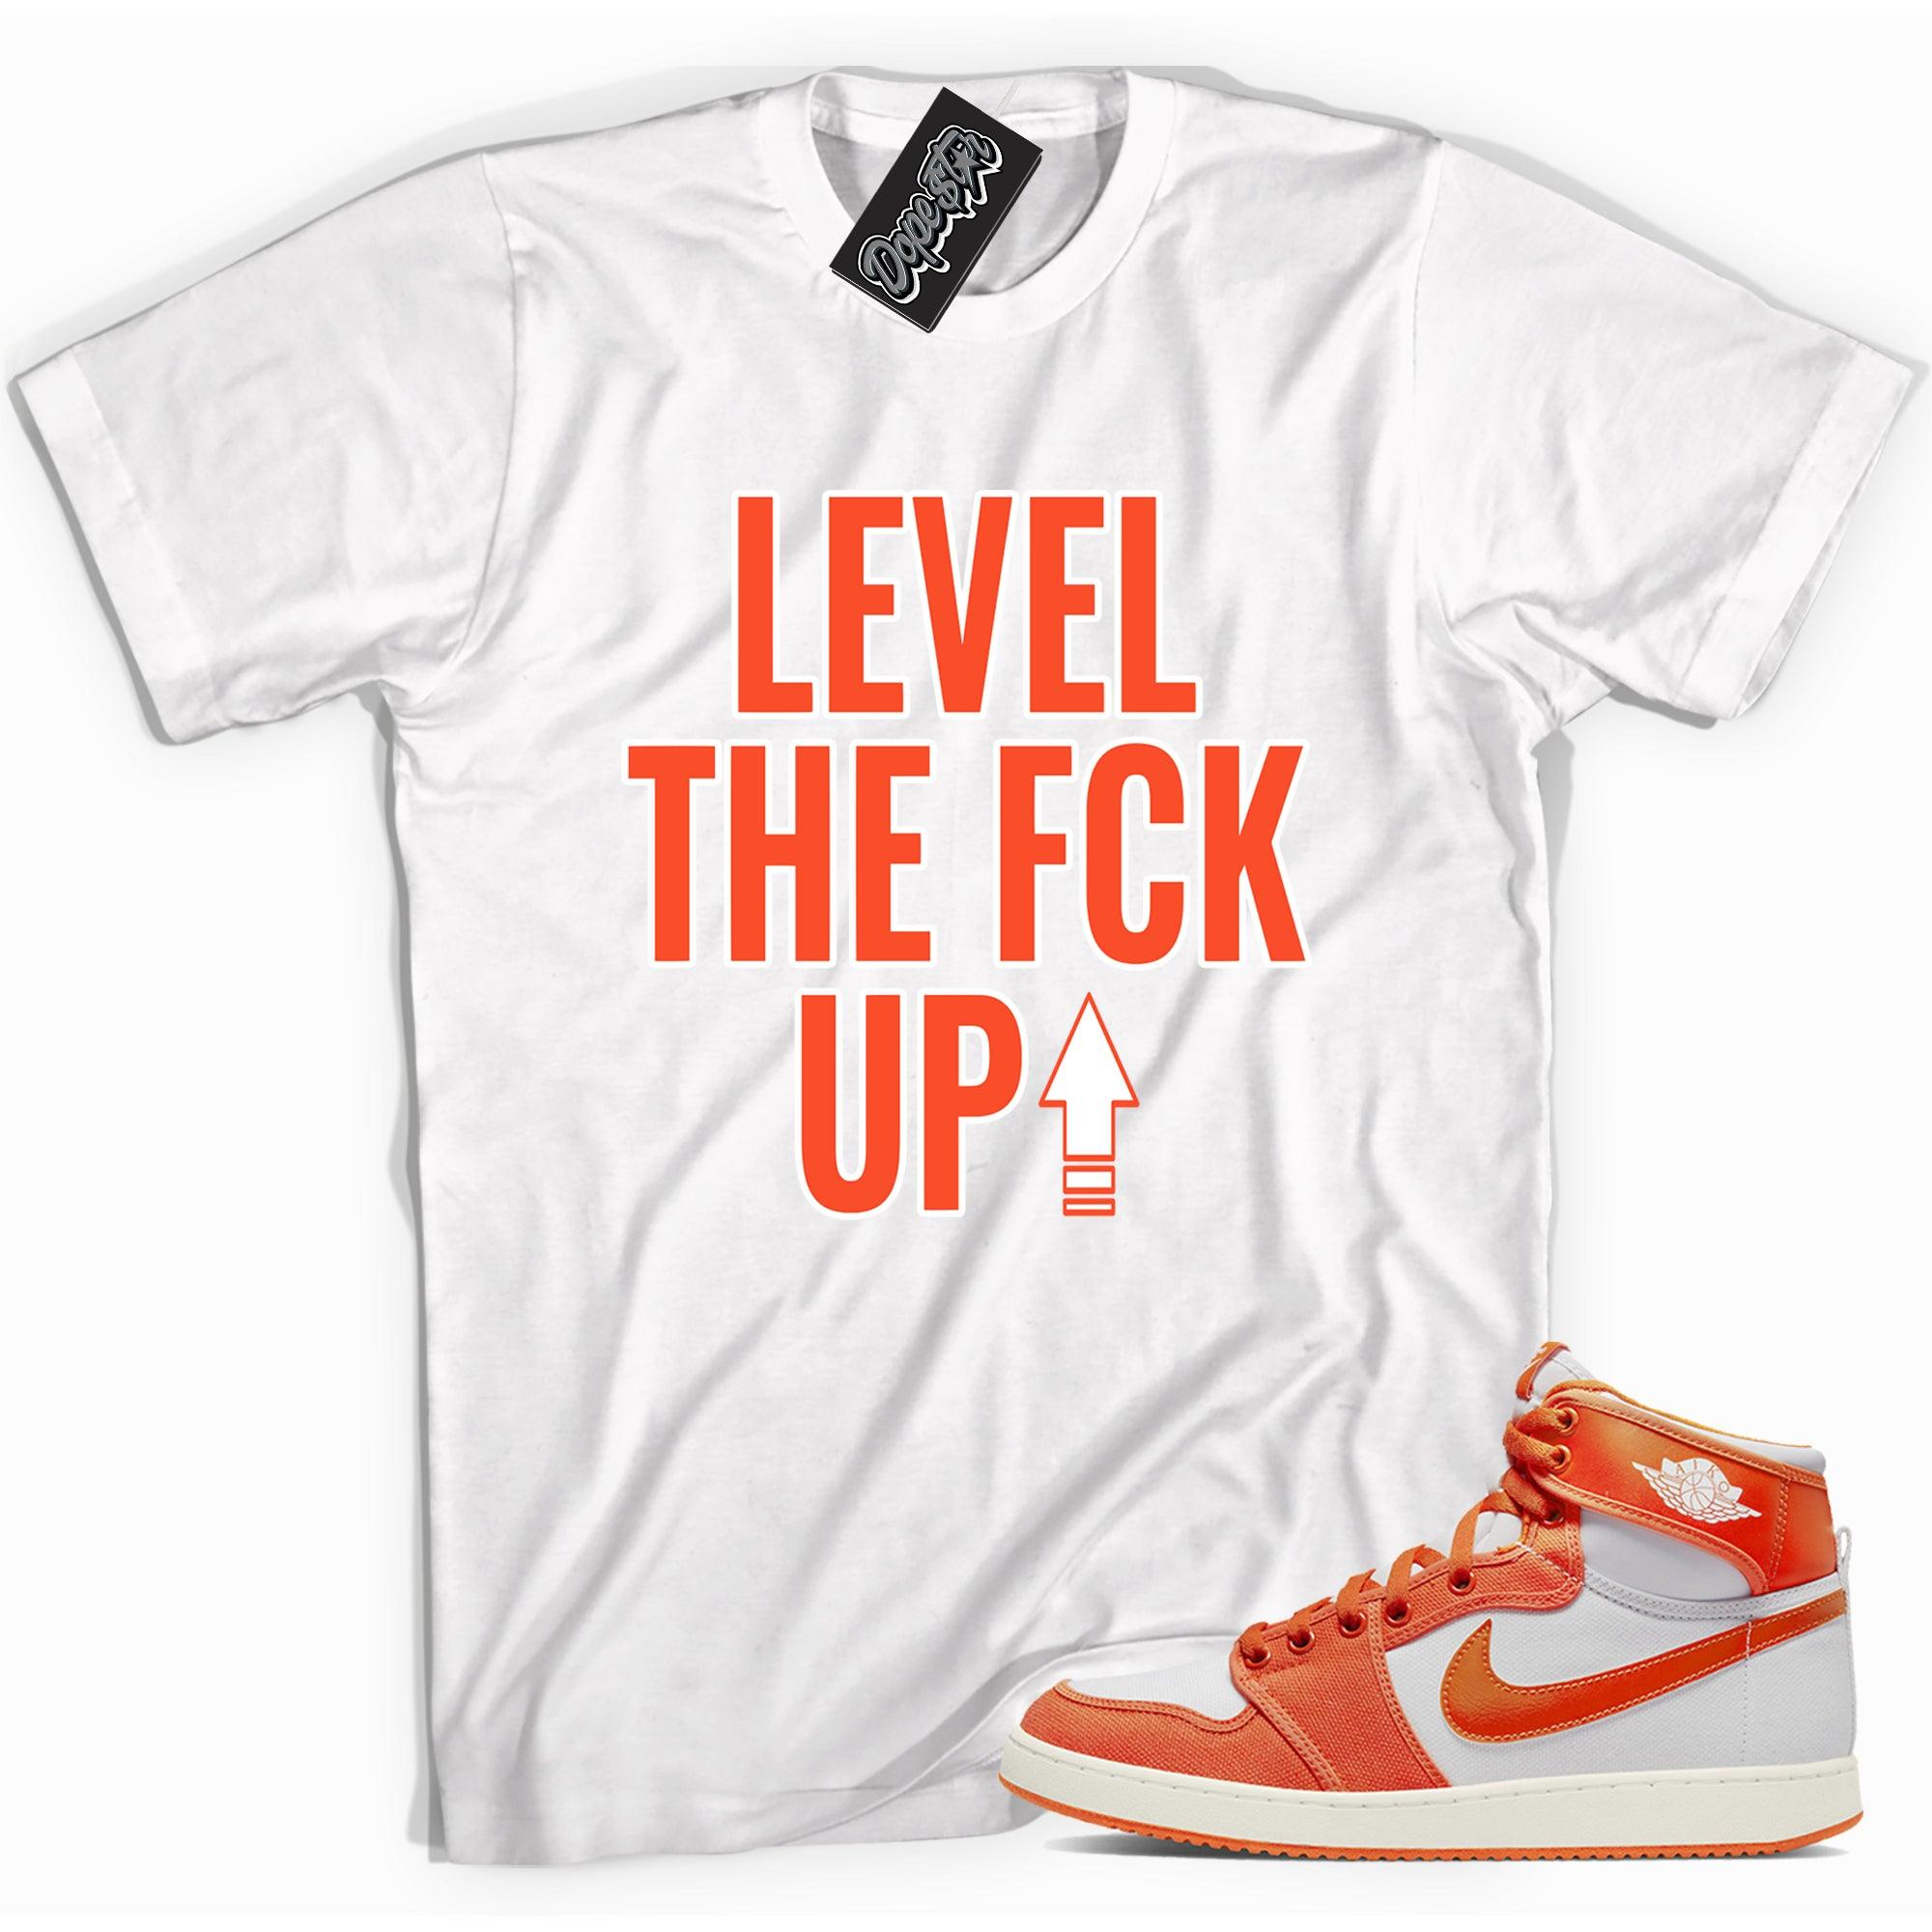 Cool white graphic tee with 'Level Up' print, that perfectly matches Air Jordan 1 KO syracuse sneakers.